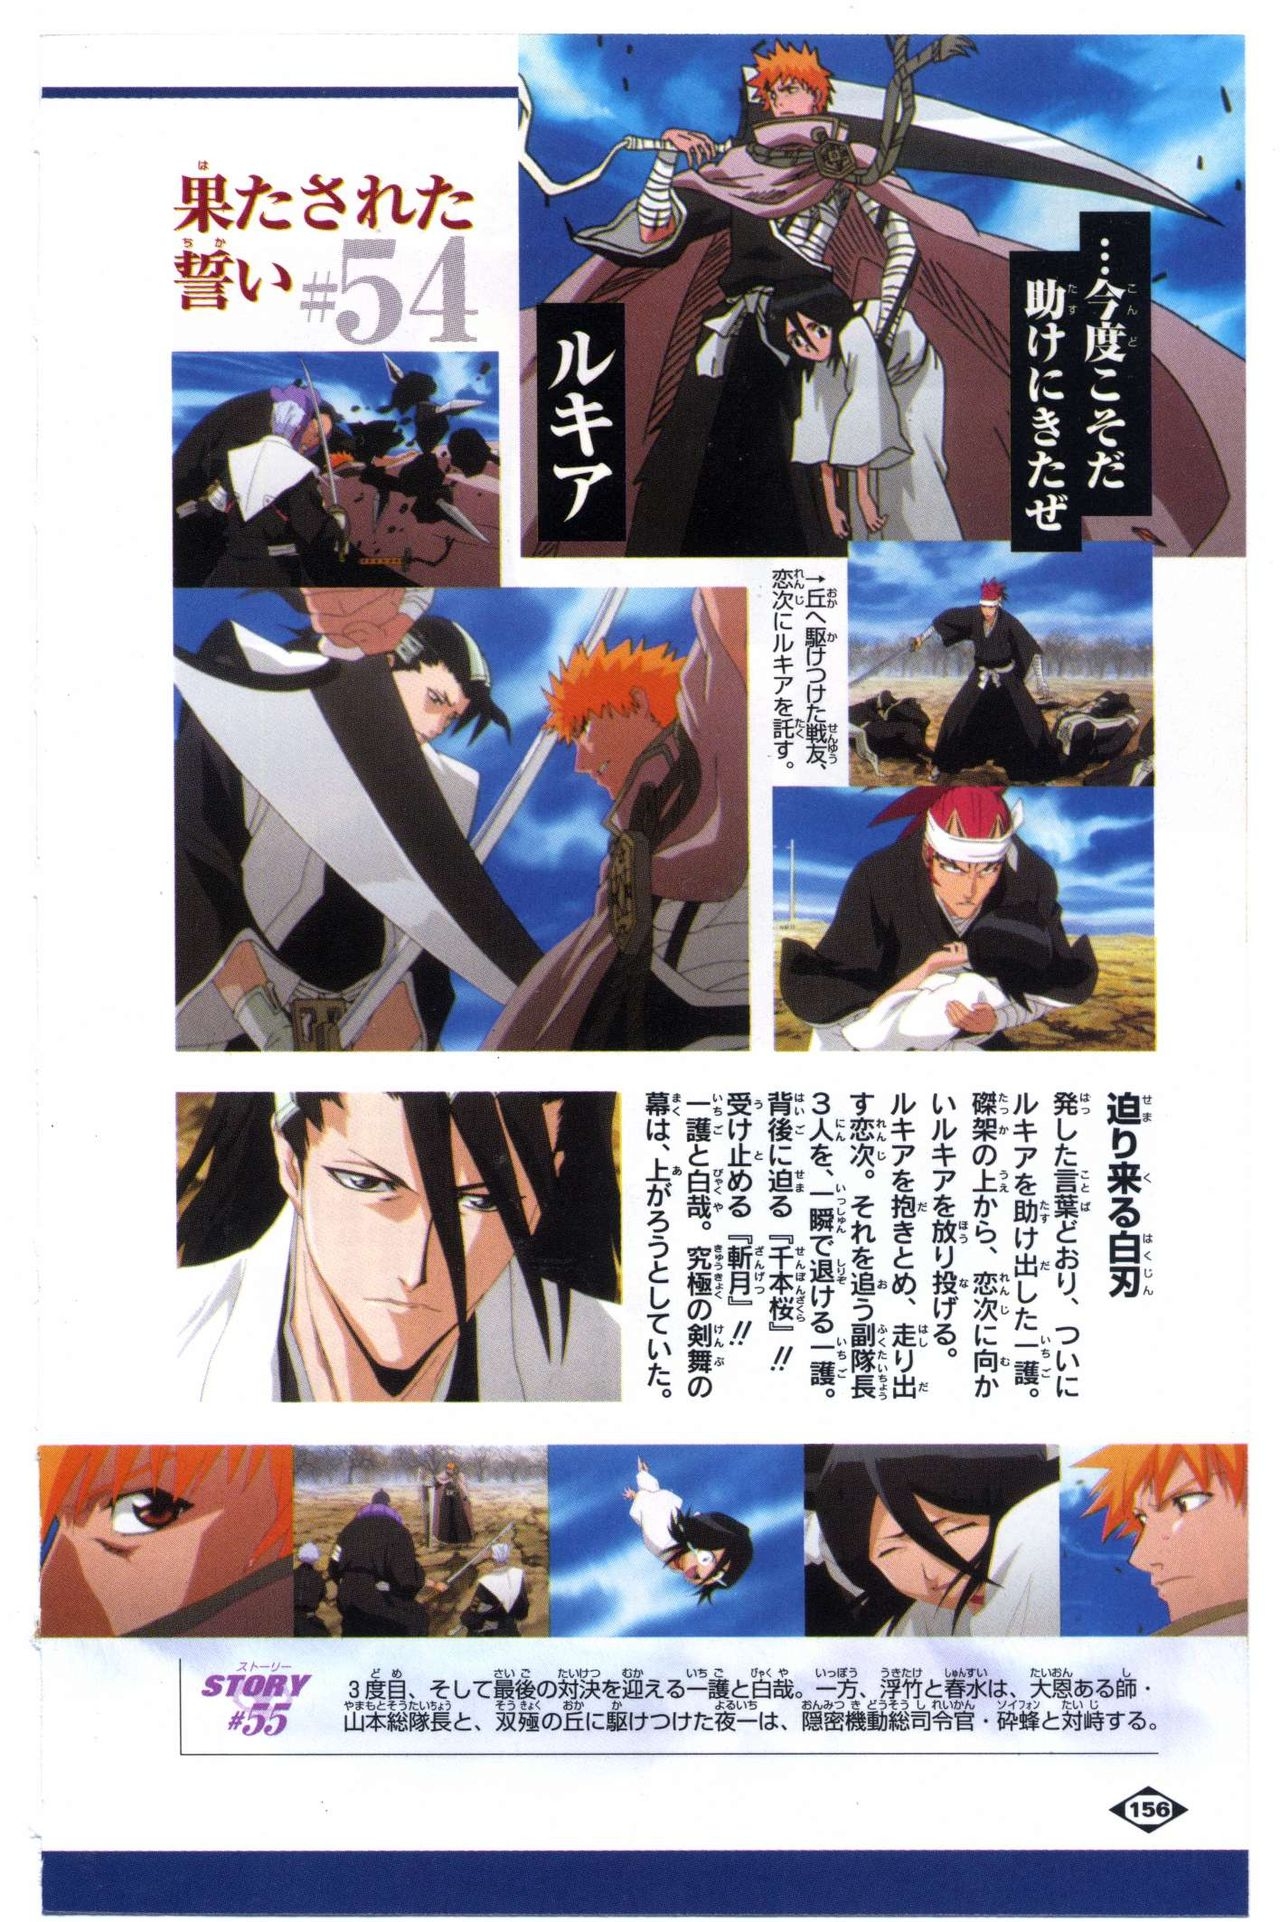 Bleach: Official Animation Book VIBEs 156